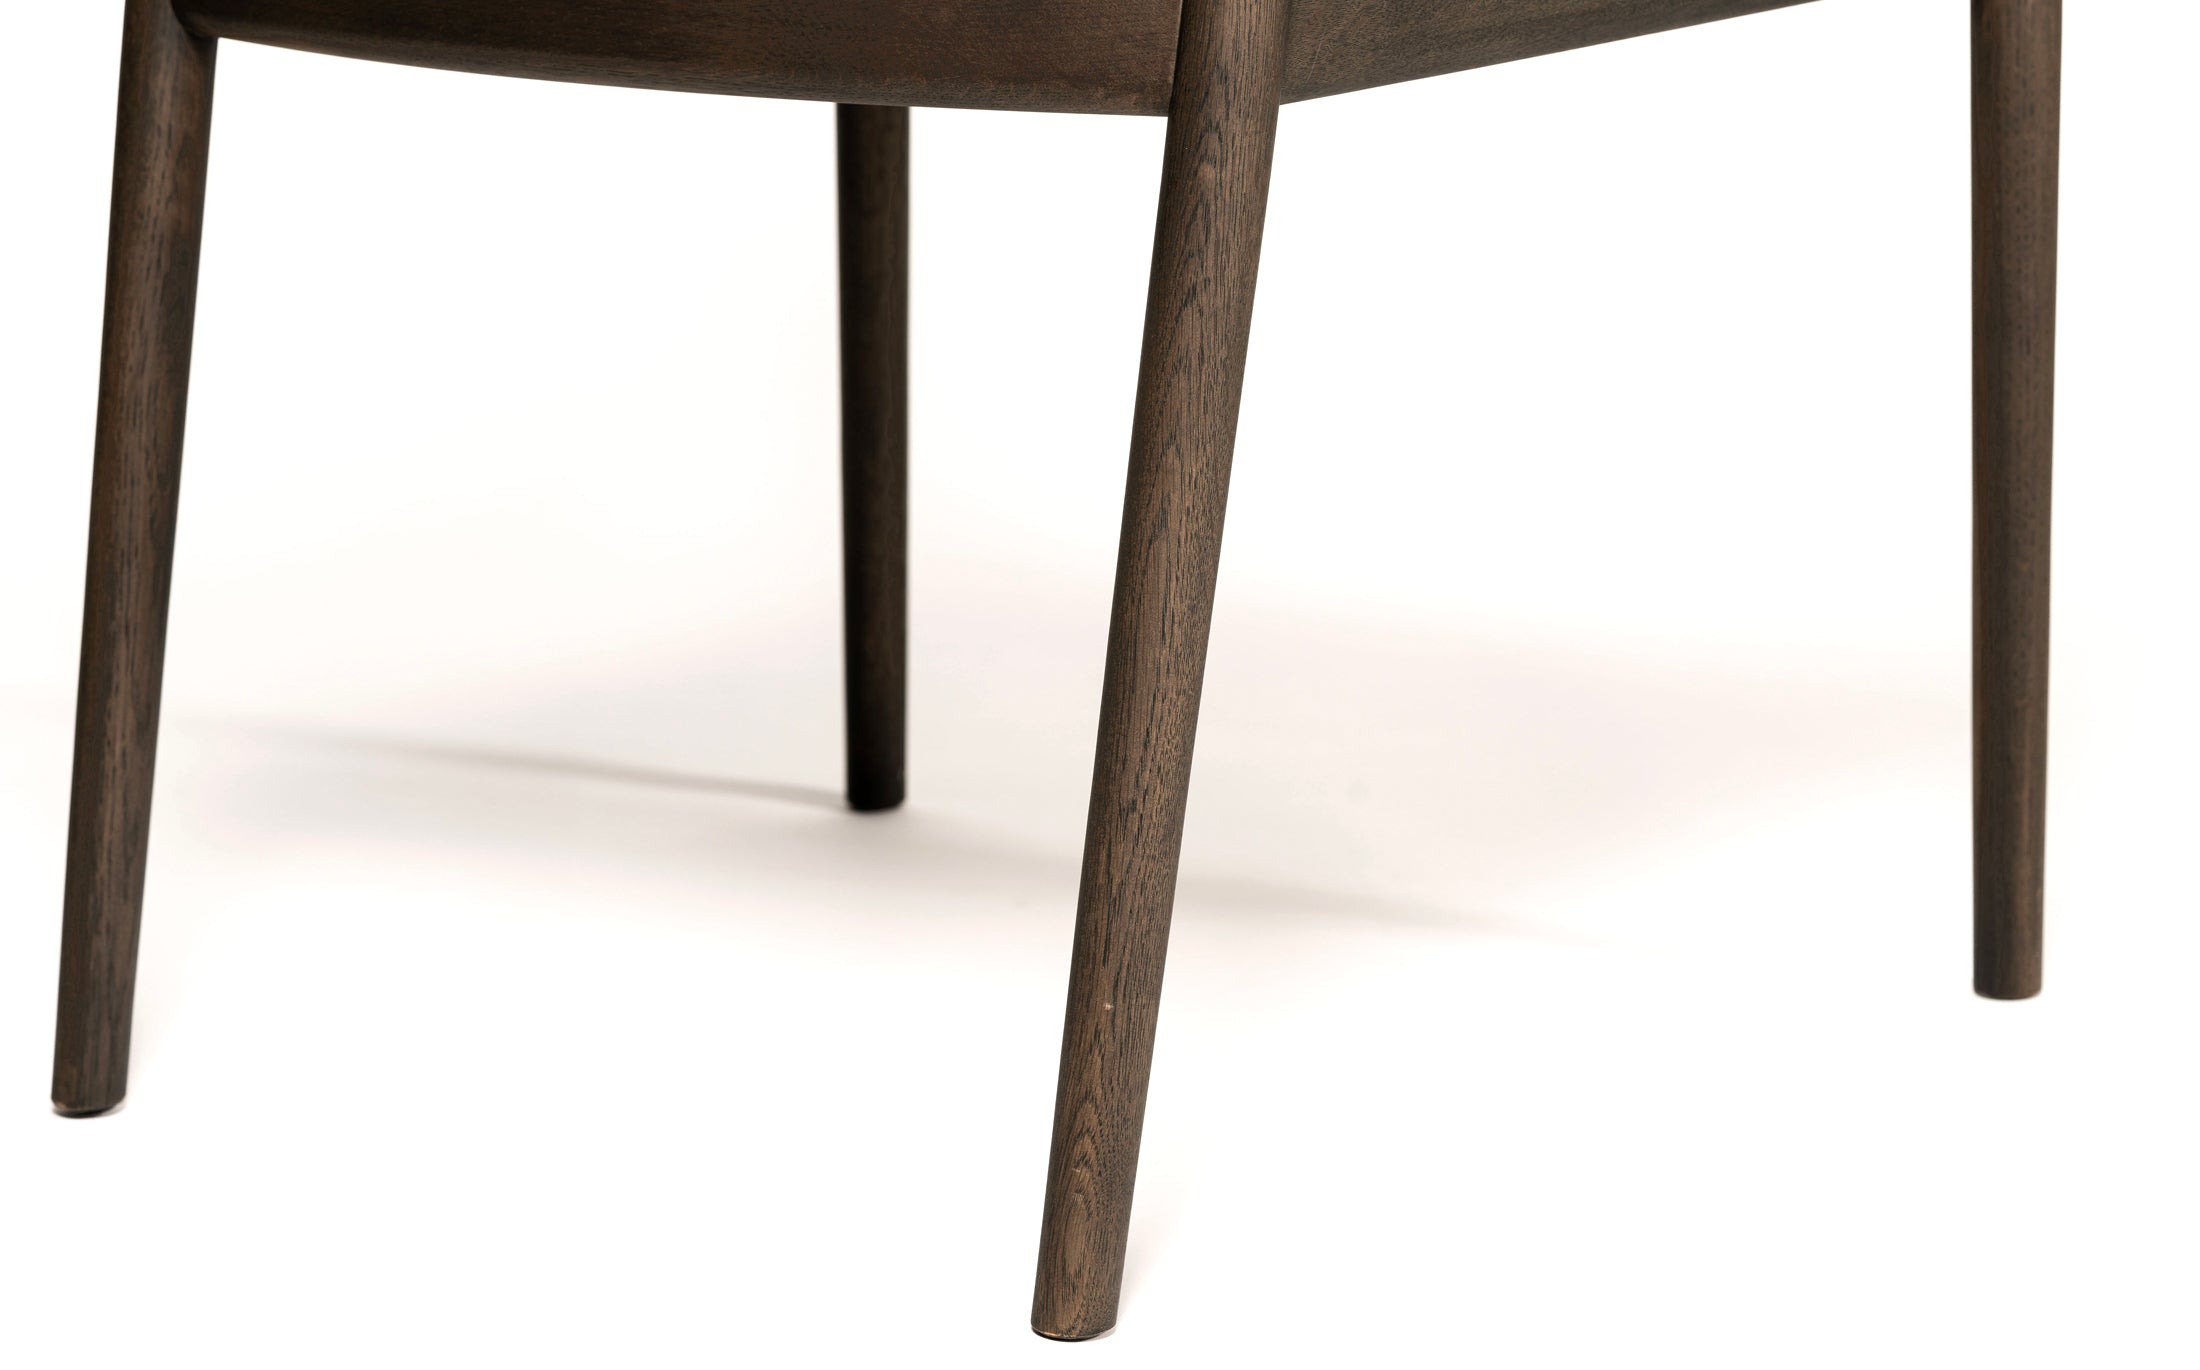 The bent chair - Charcoal Grey